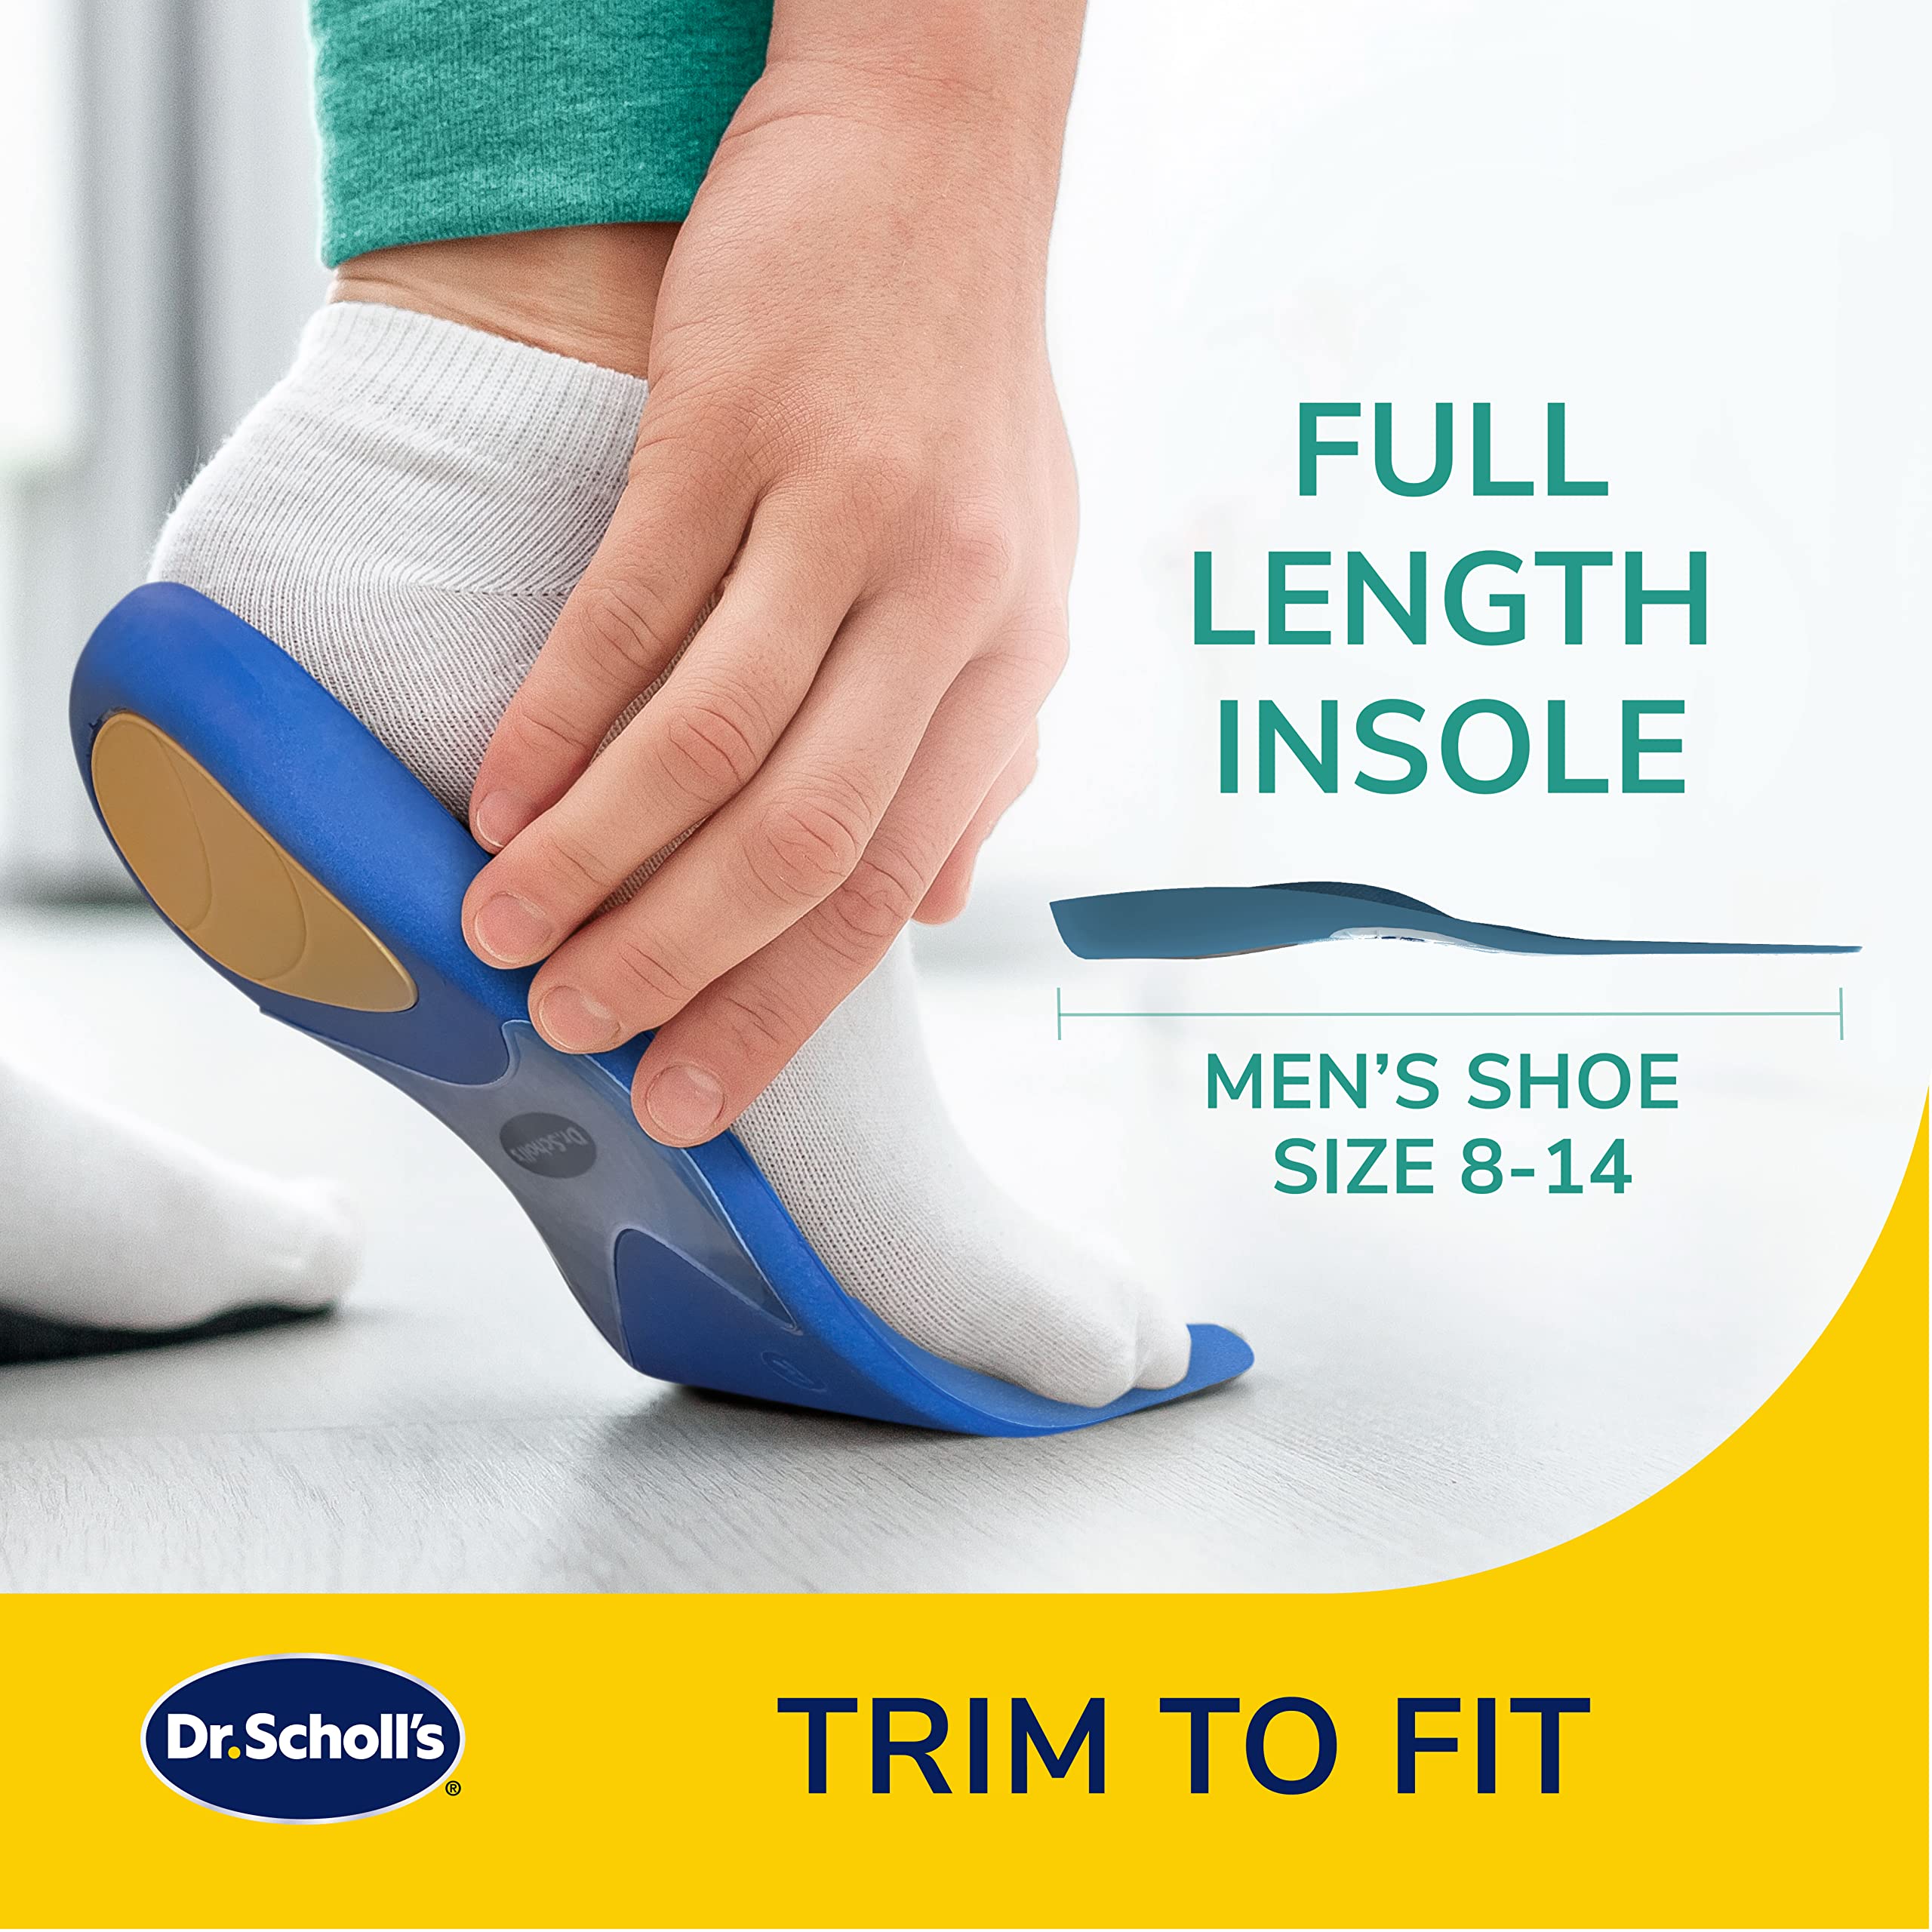 Dr. Scholl's Prevent Pain Lower Body Protective Insoles, 1 Pair, Men's 8-14, Protects Against Foot, Knee, Heel, and Lower Back Pain, Trim to Fit Inserts